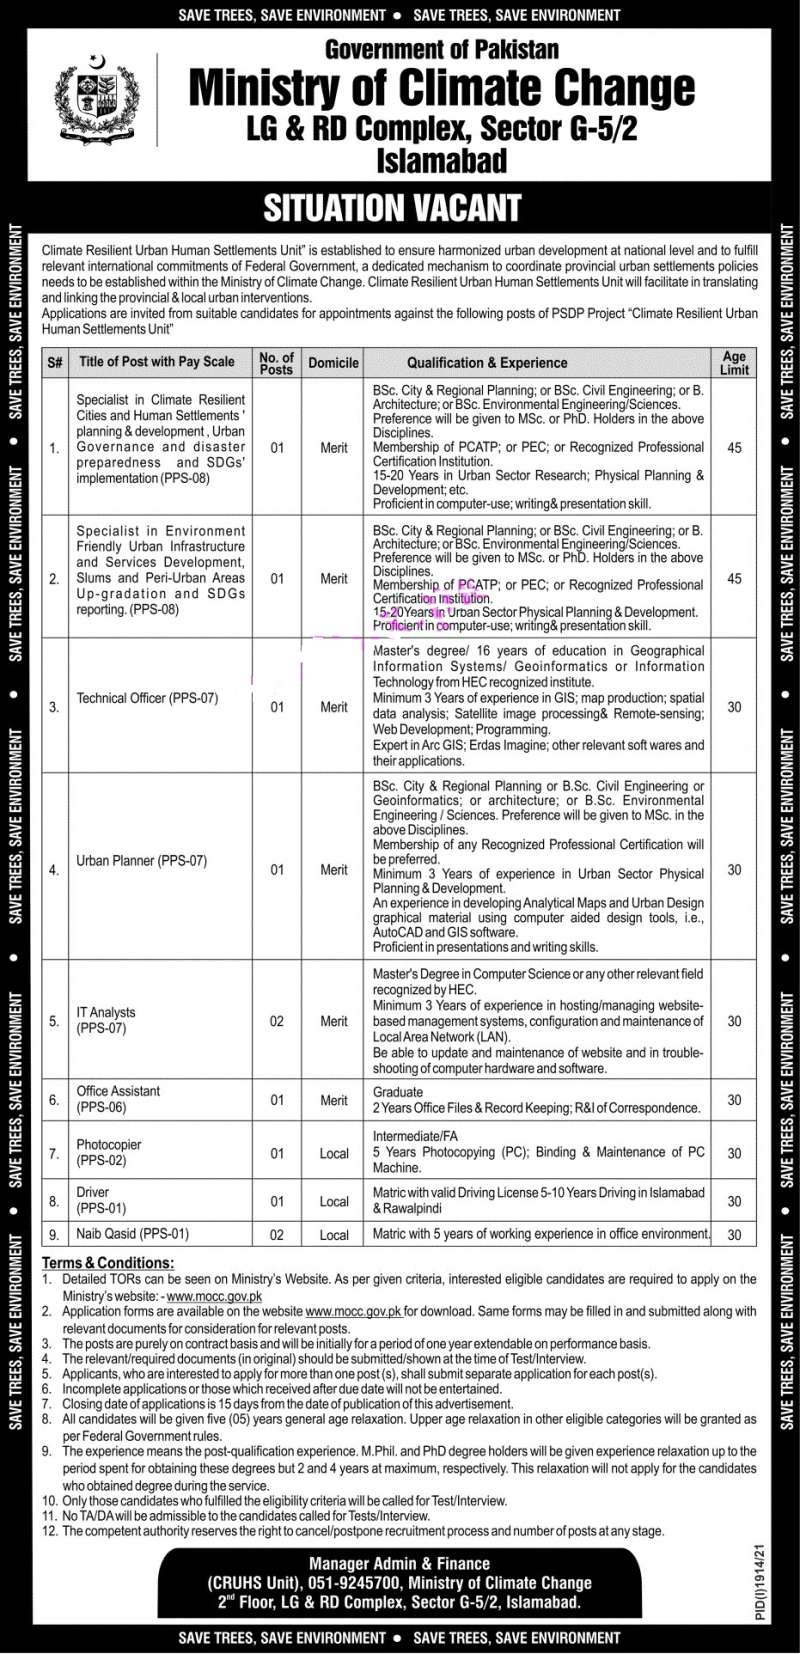 Ministry of Climate Change Islamabad Jobs 2021